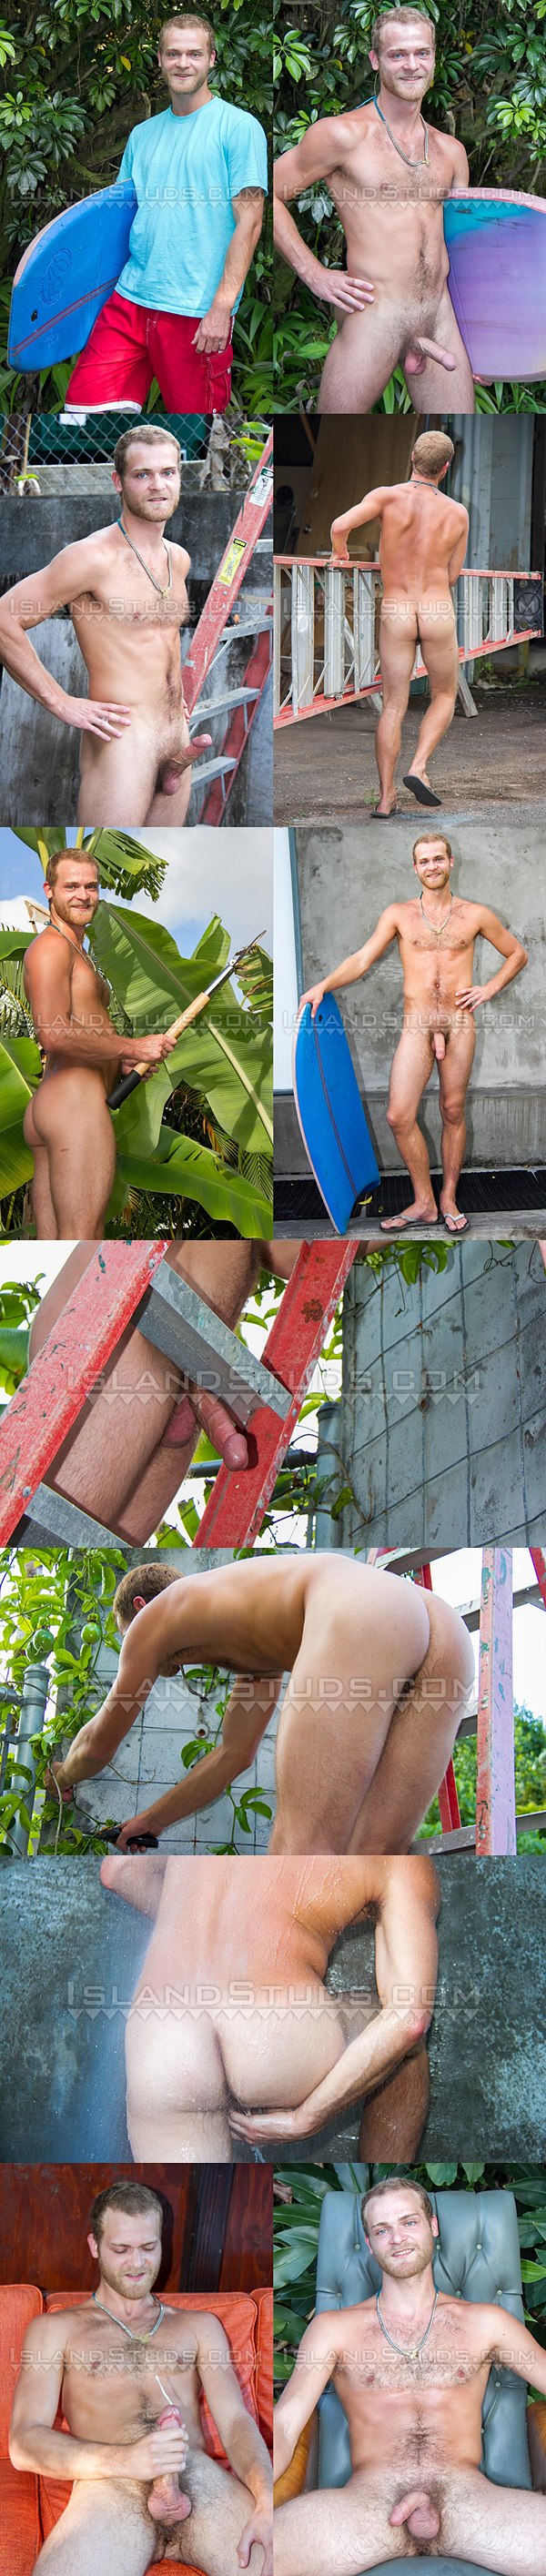 Hairy straight tan surfer Nickolas shows off his fit naked body before he milks the jizz out of his hard cock at Island Studs